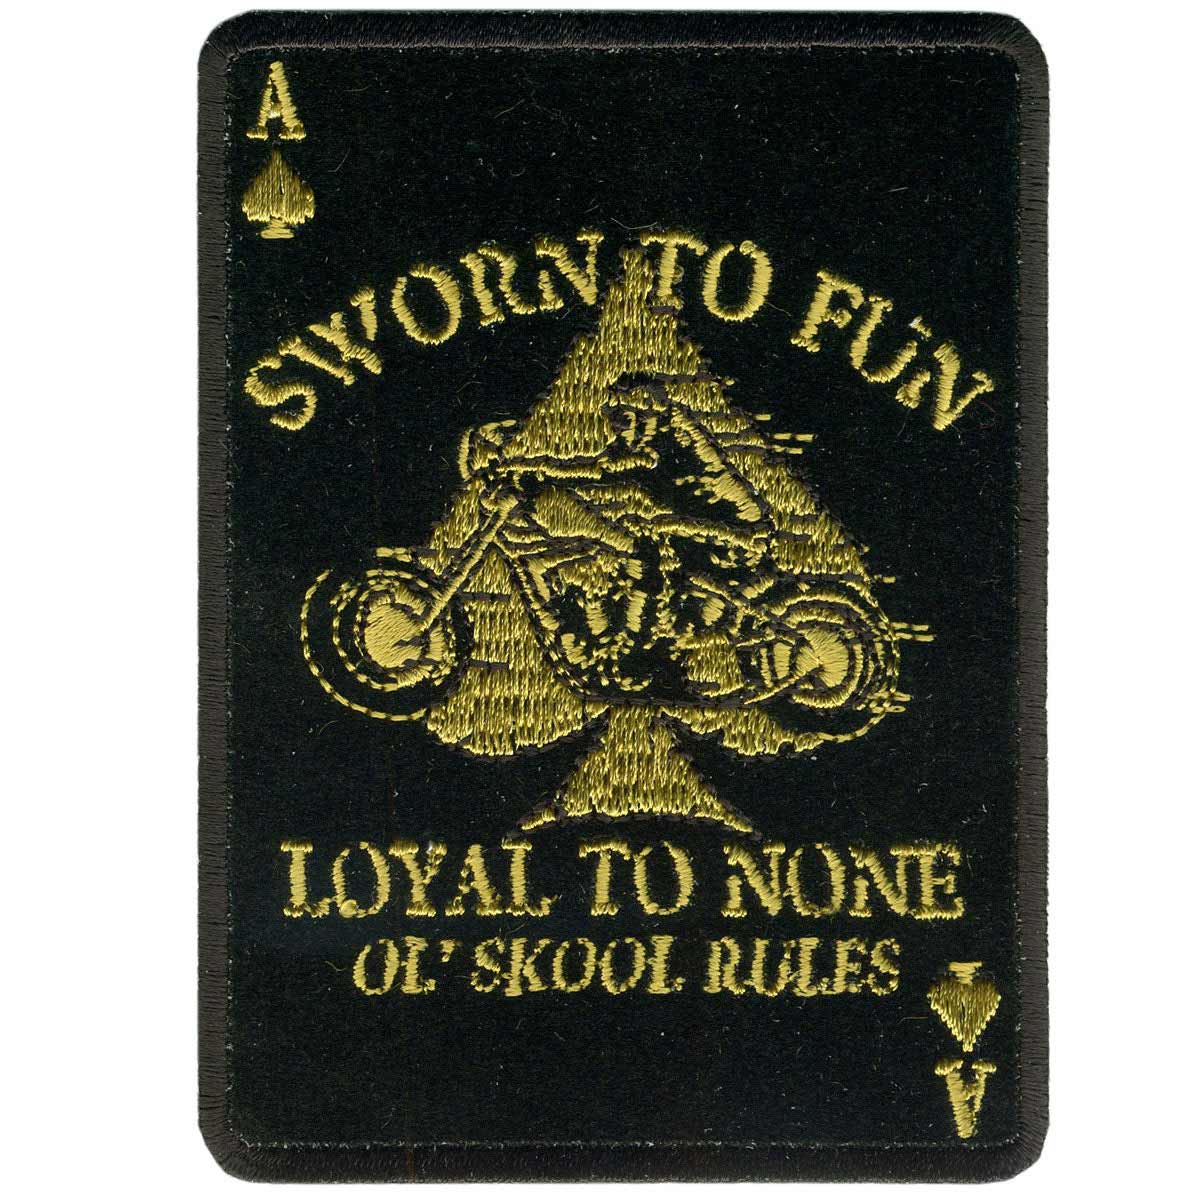 Hot Leathers Loyal To None 3" x 4" Patch PPA2842